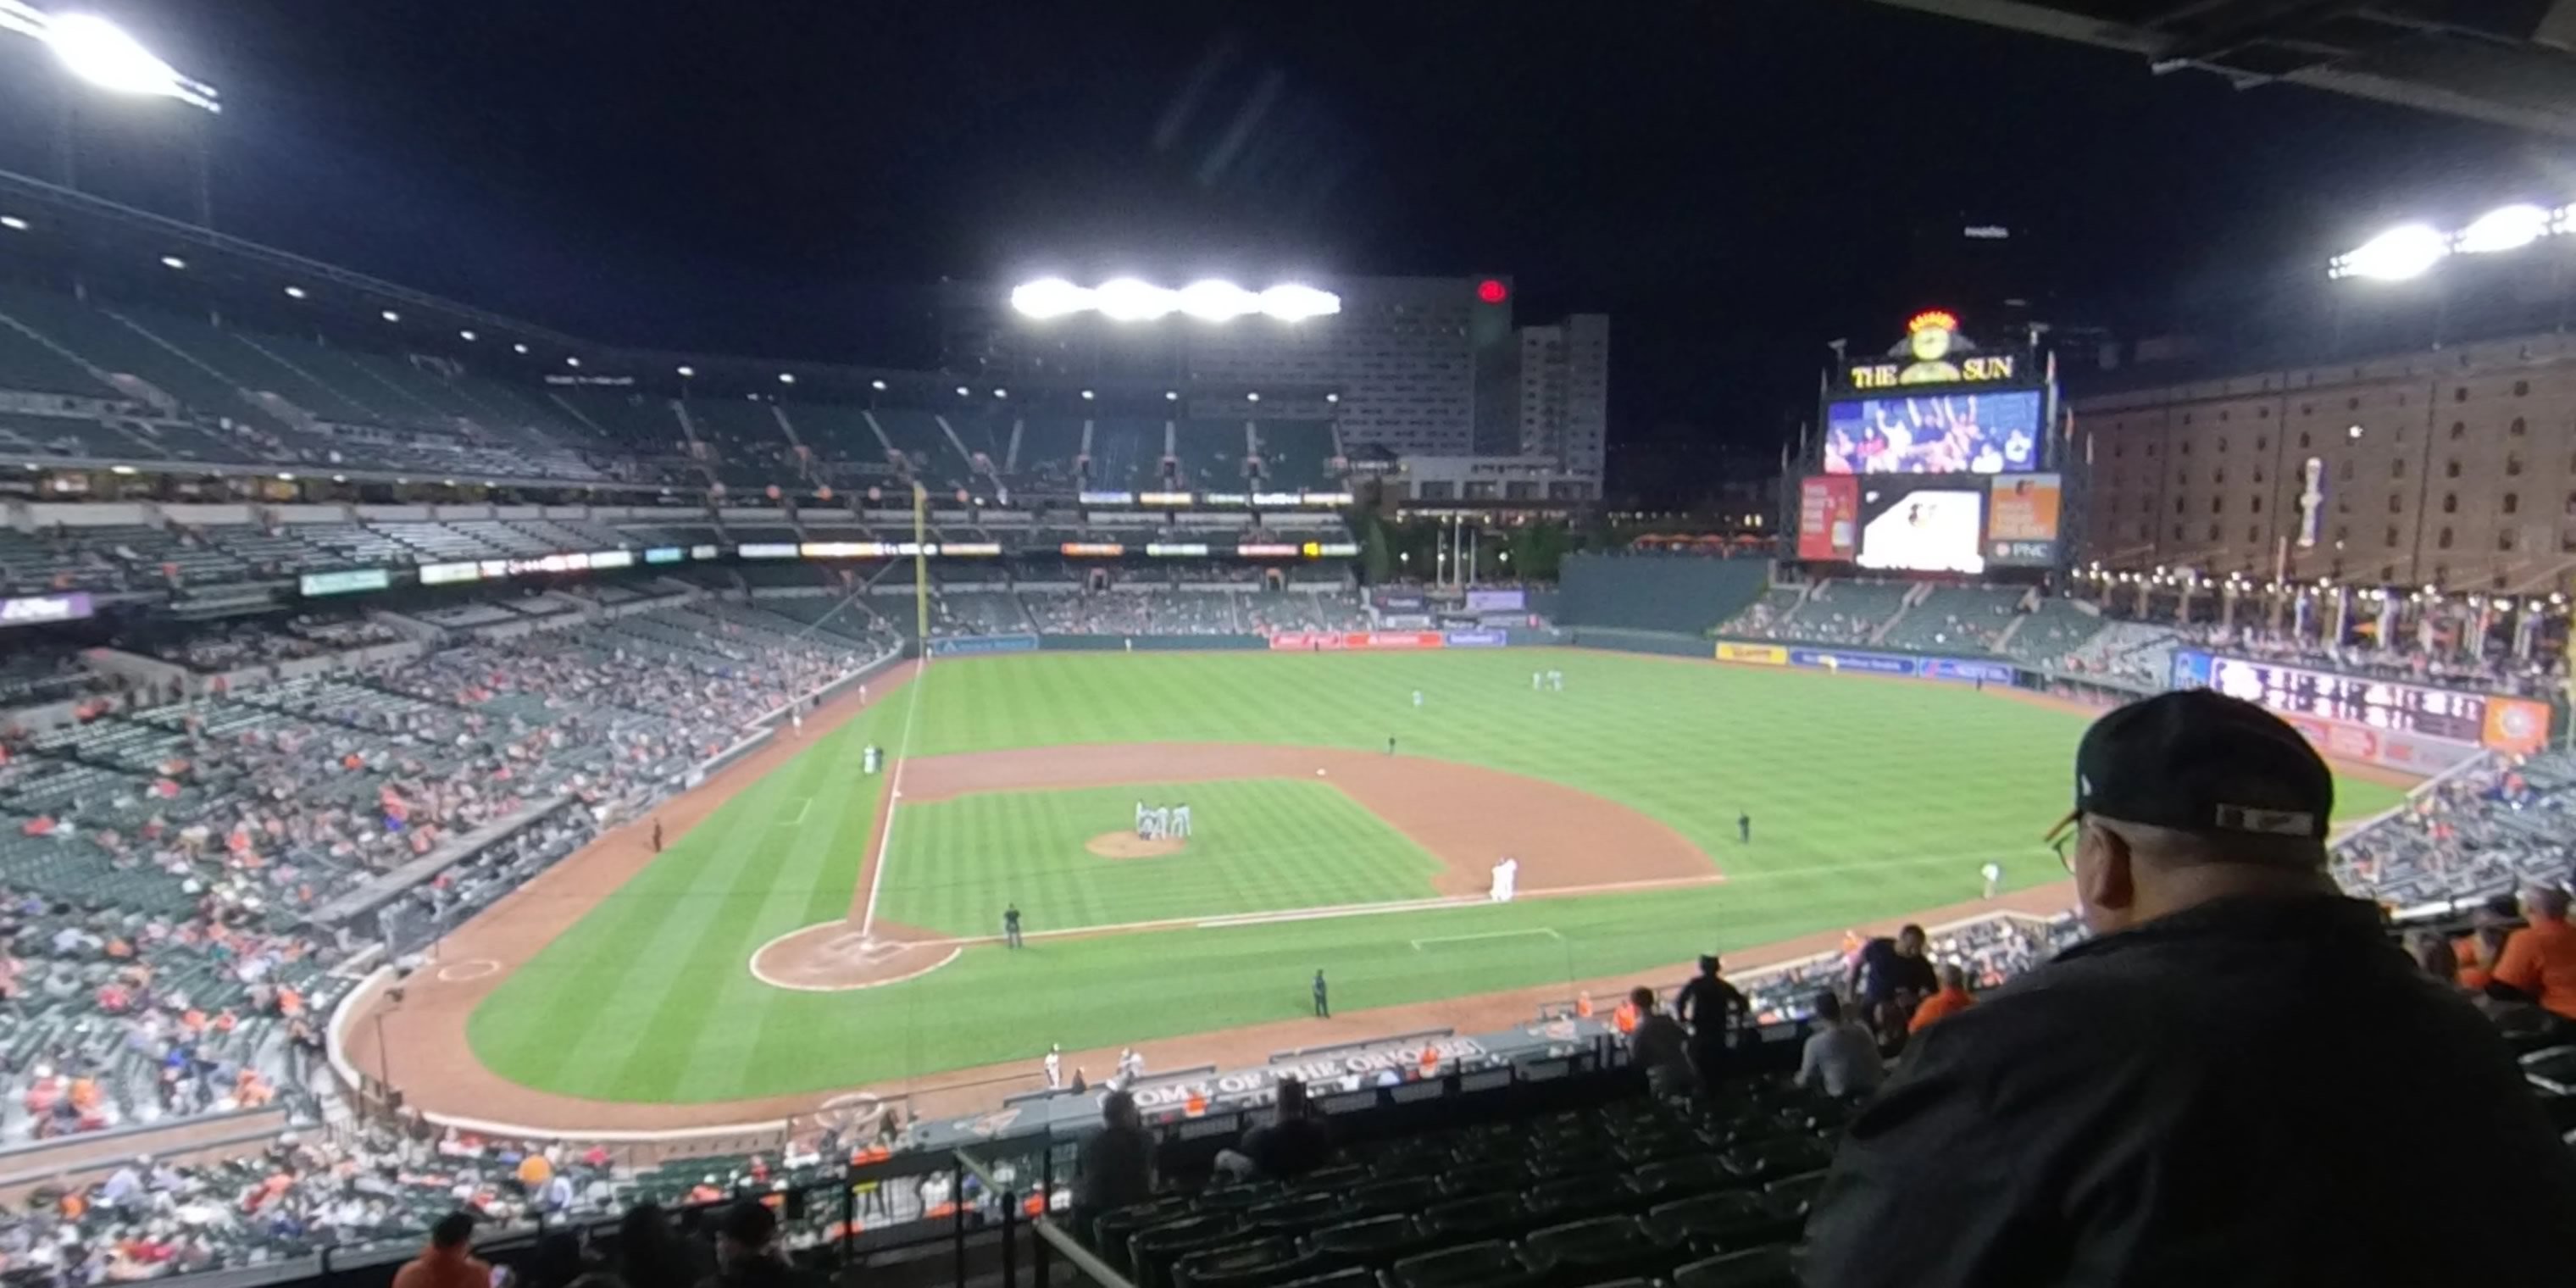 section 226 panoramic seat view  - oriole park